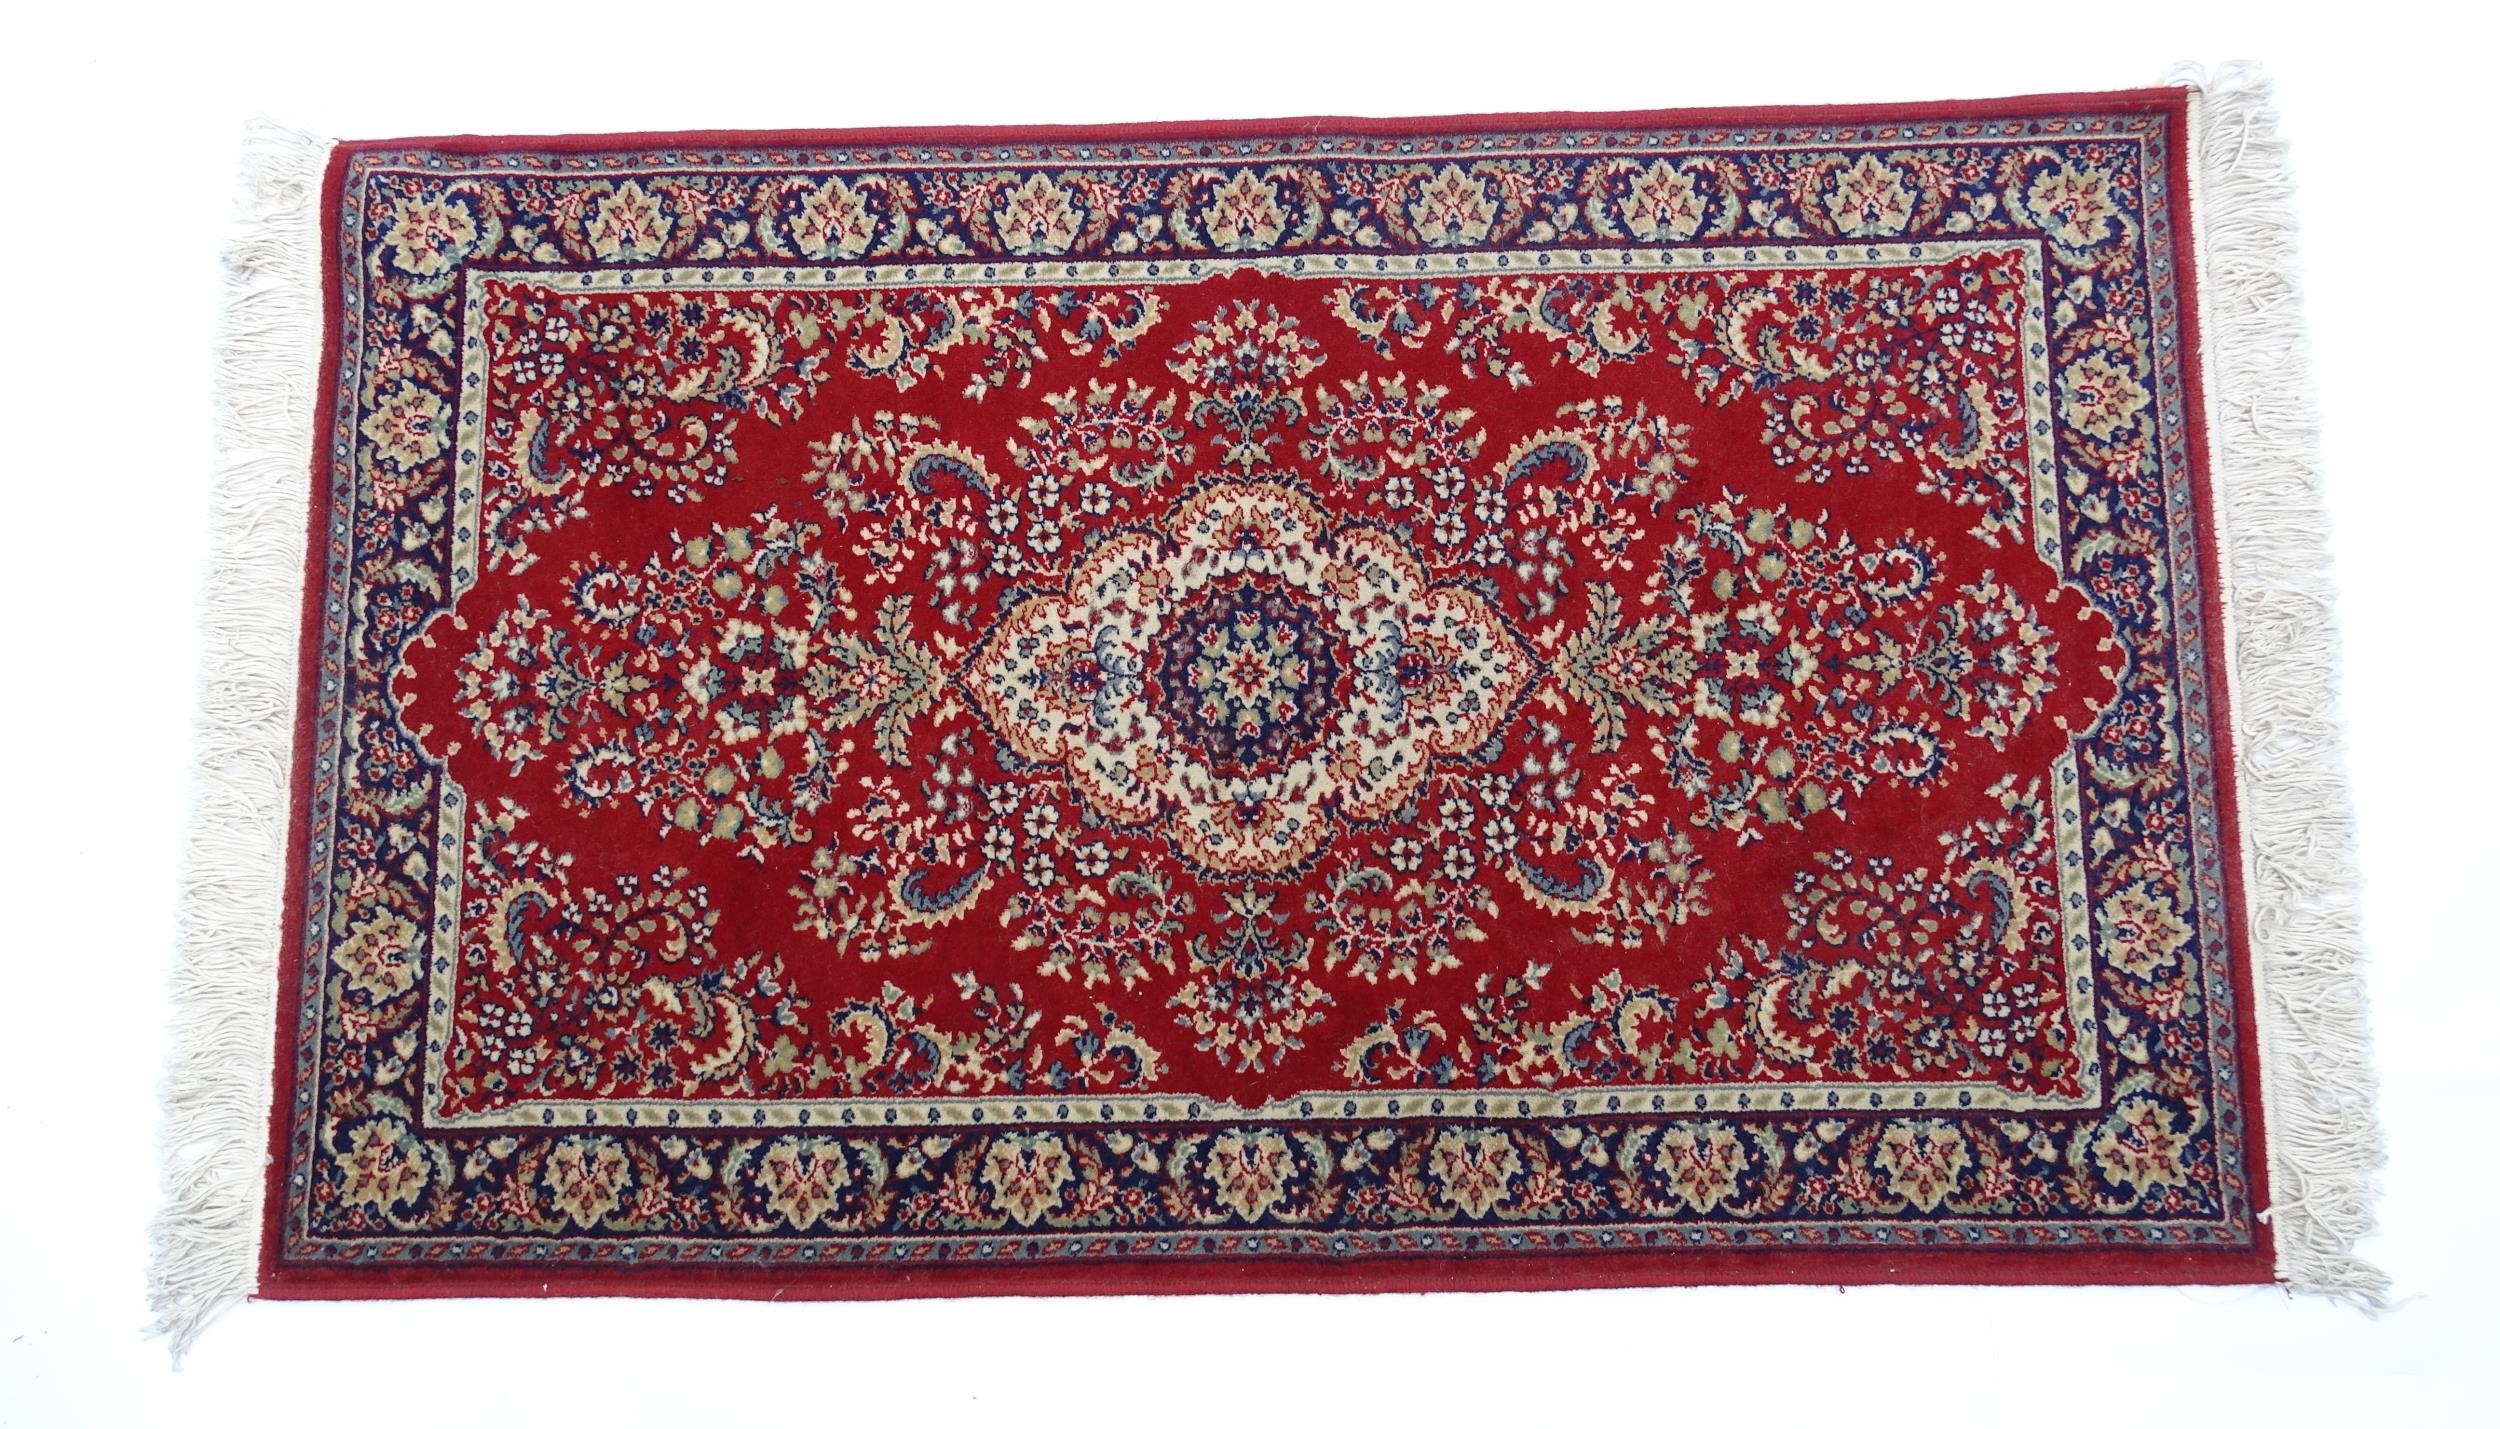 Carpet / Rug : A red ground rug with central cream and blue vignette, decorated with floral and